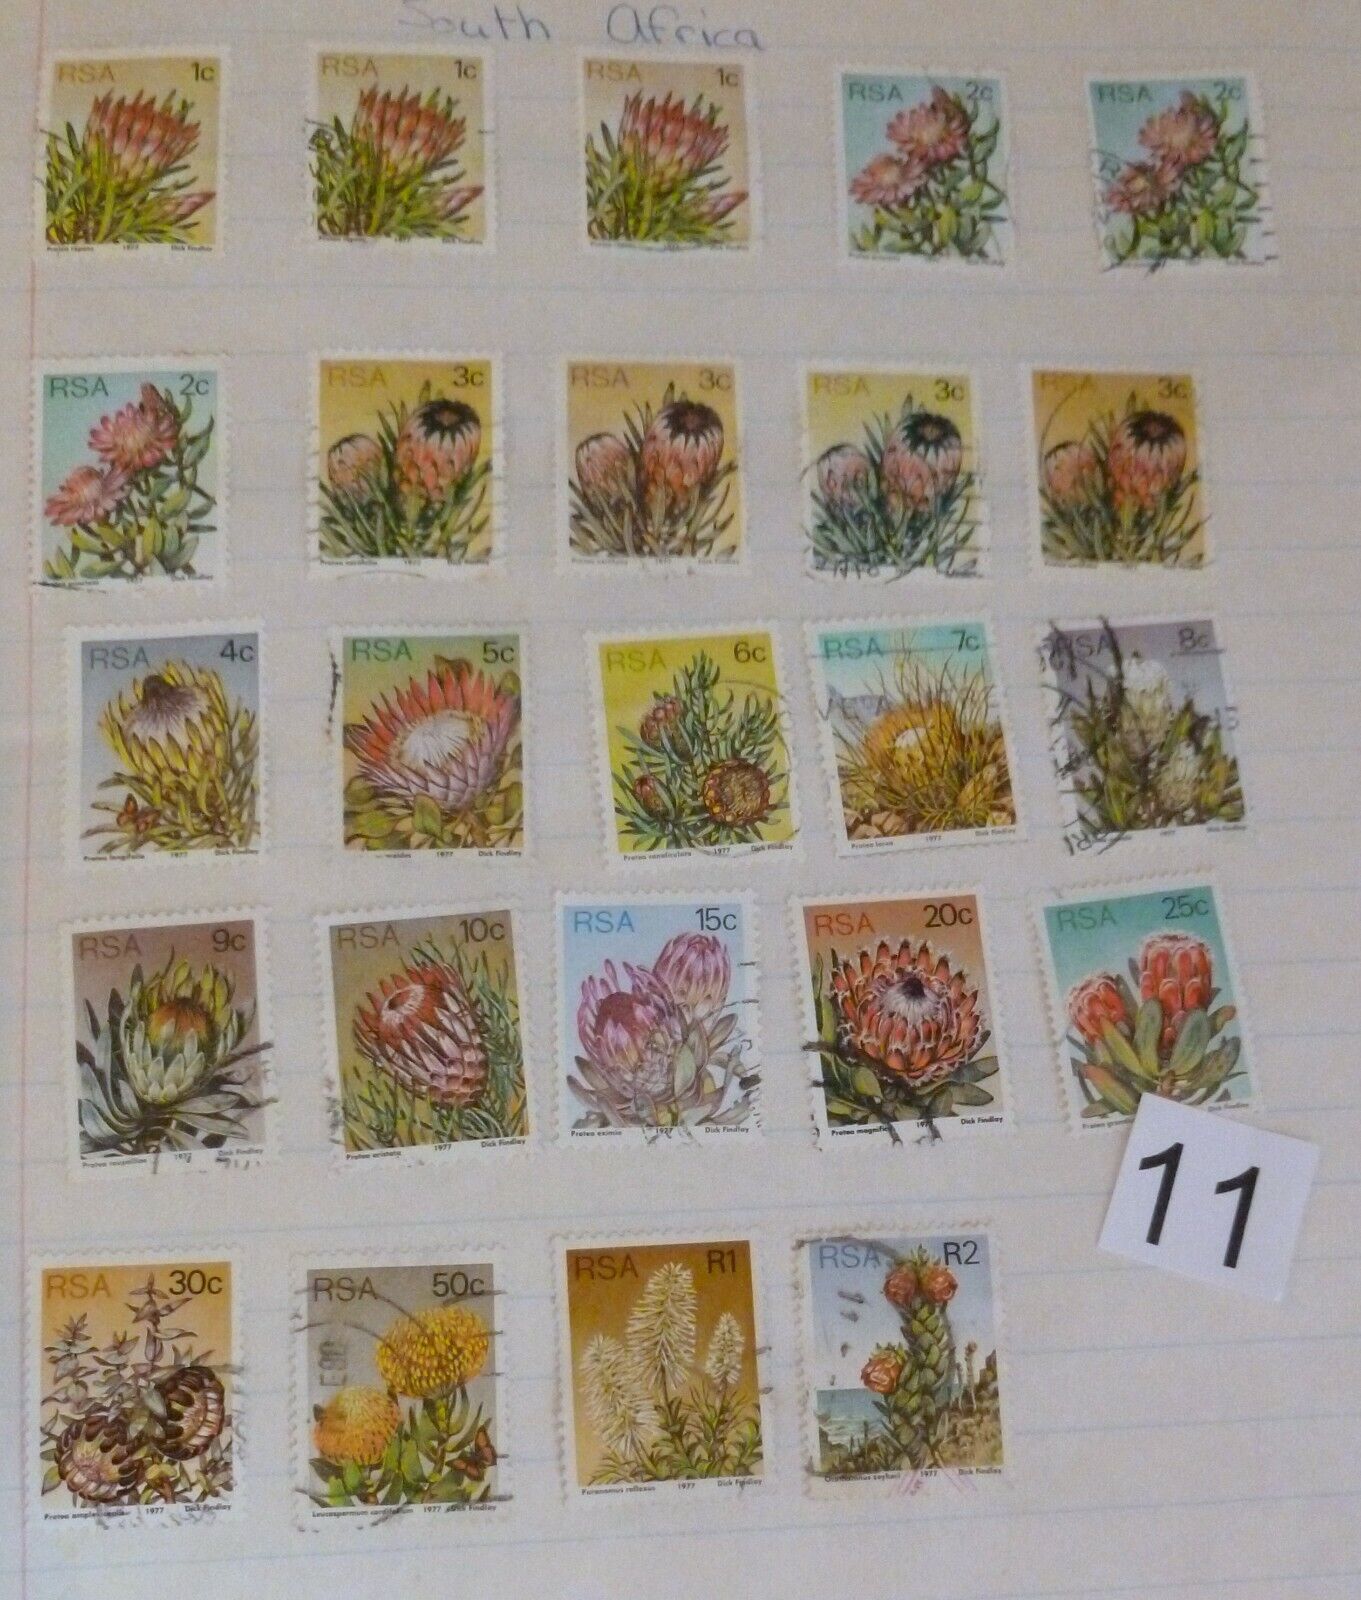 SOUTH AFRICA 24 POSTAGE STAMPS PROTEA Flowers 10 w/ Background Color Variation  Без бренда